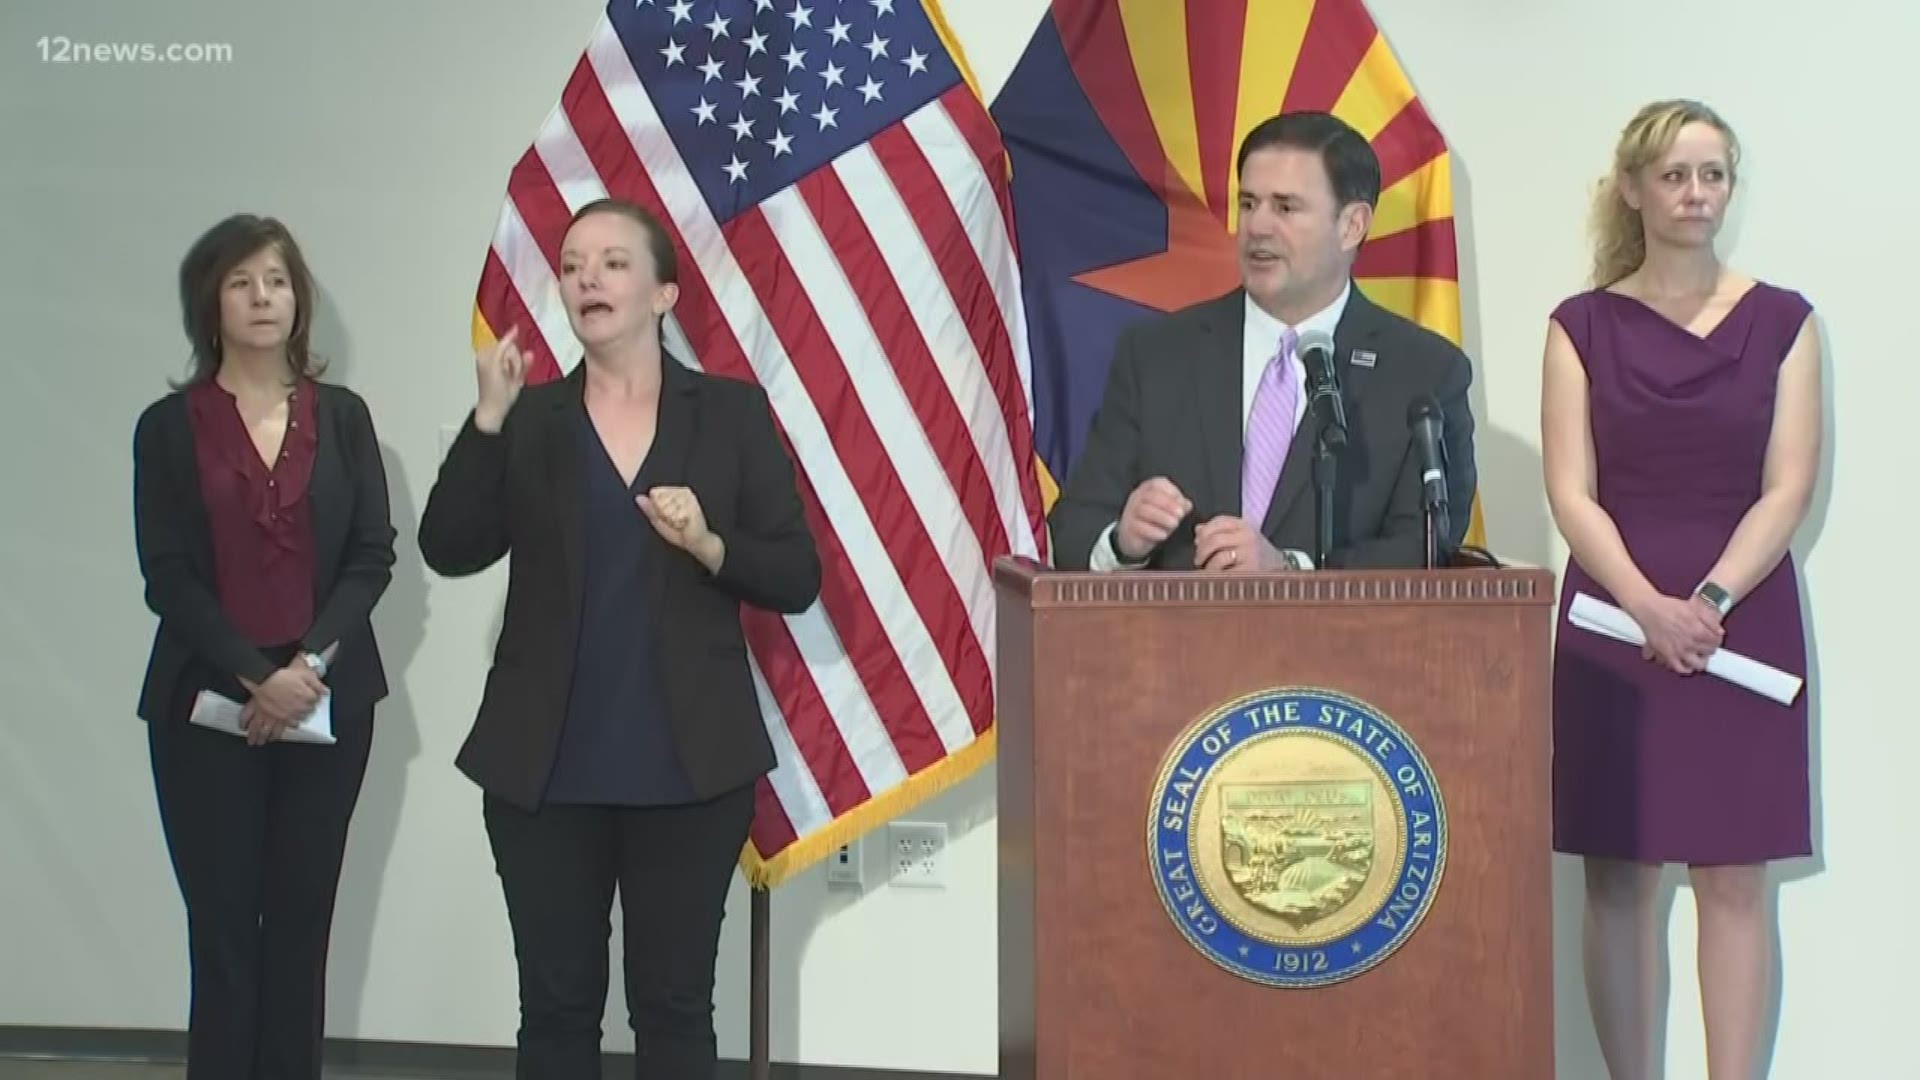 Gov. Ducey issued four executive orders that will make things more difficult for those traveling. Another is set to bring some relief to small businesses.